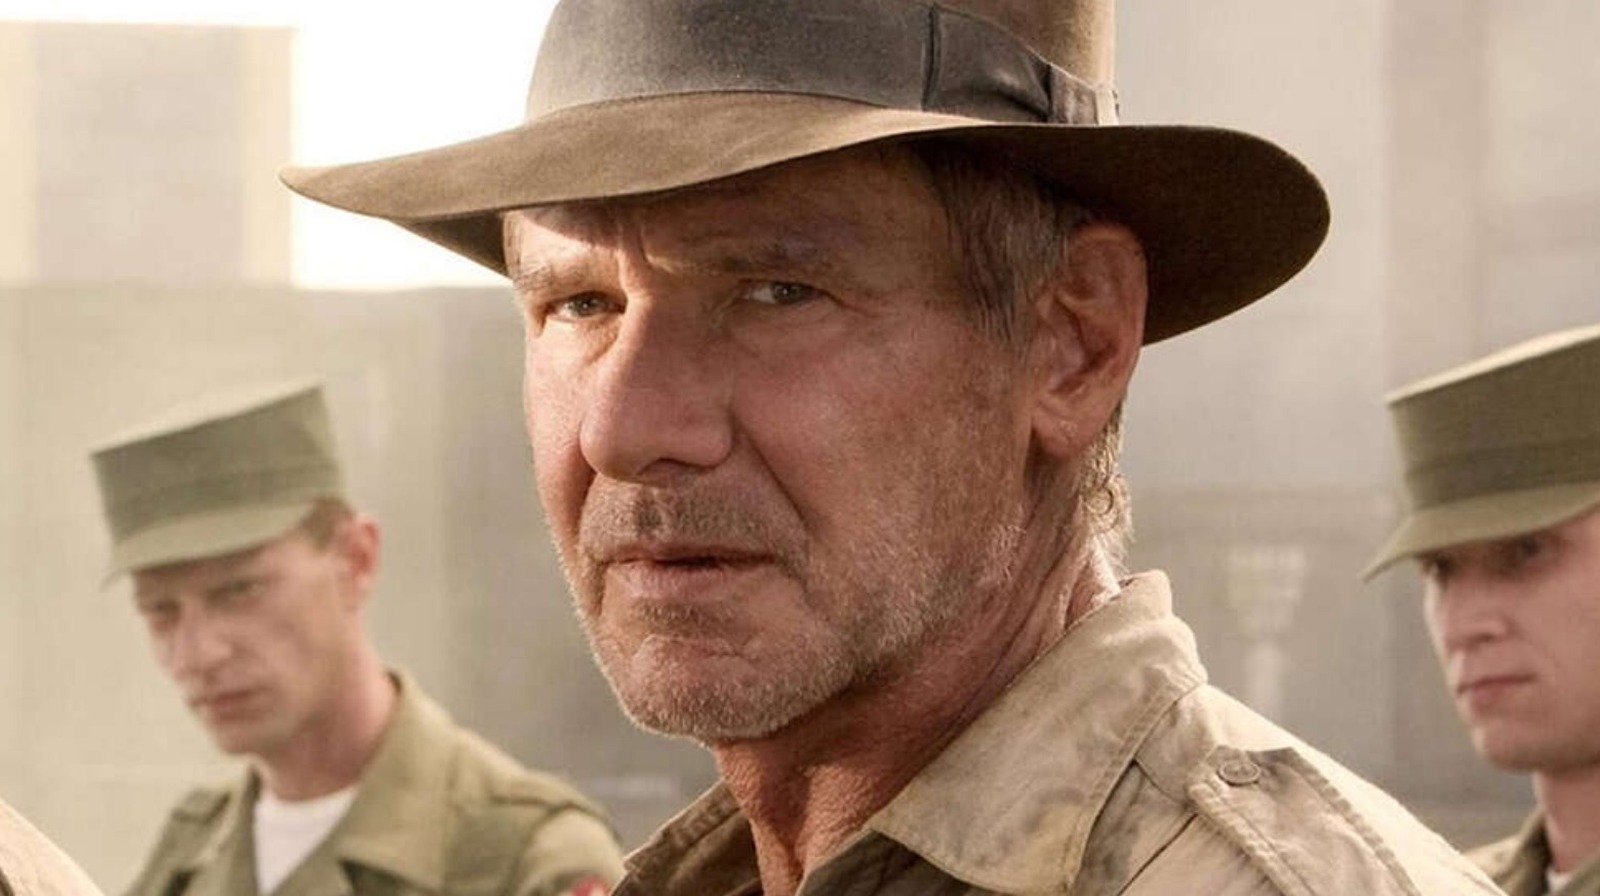 Indiana Jones The Series' Best And Worst Movie, According To Rotten